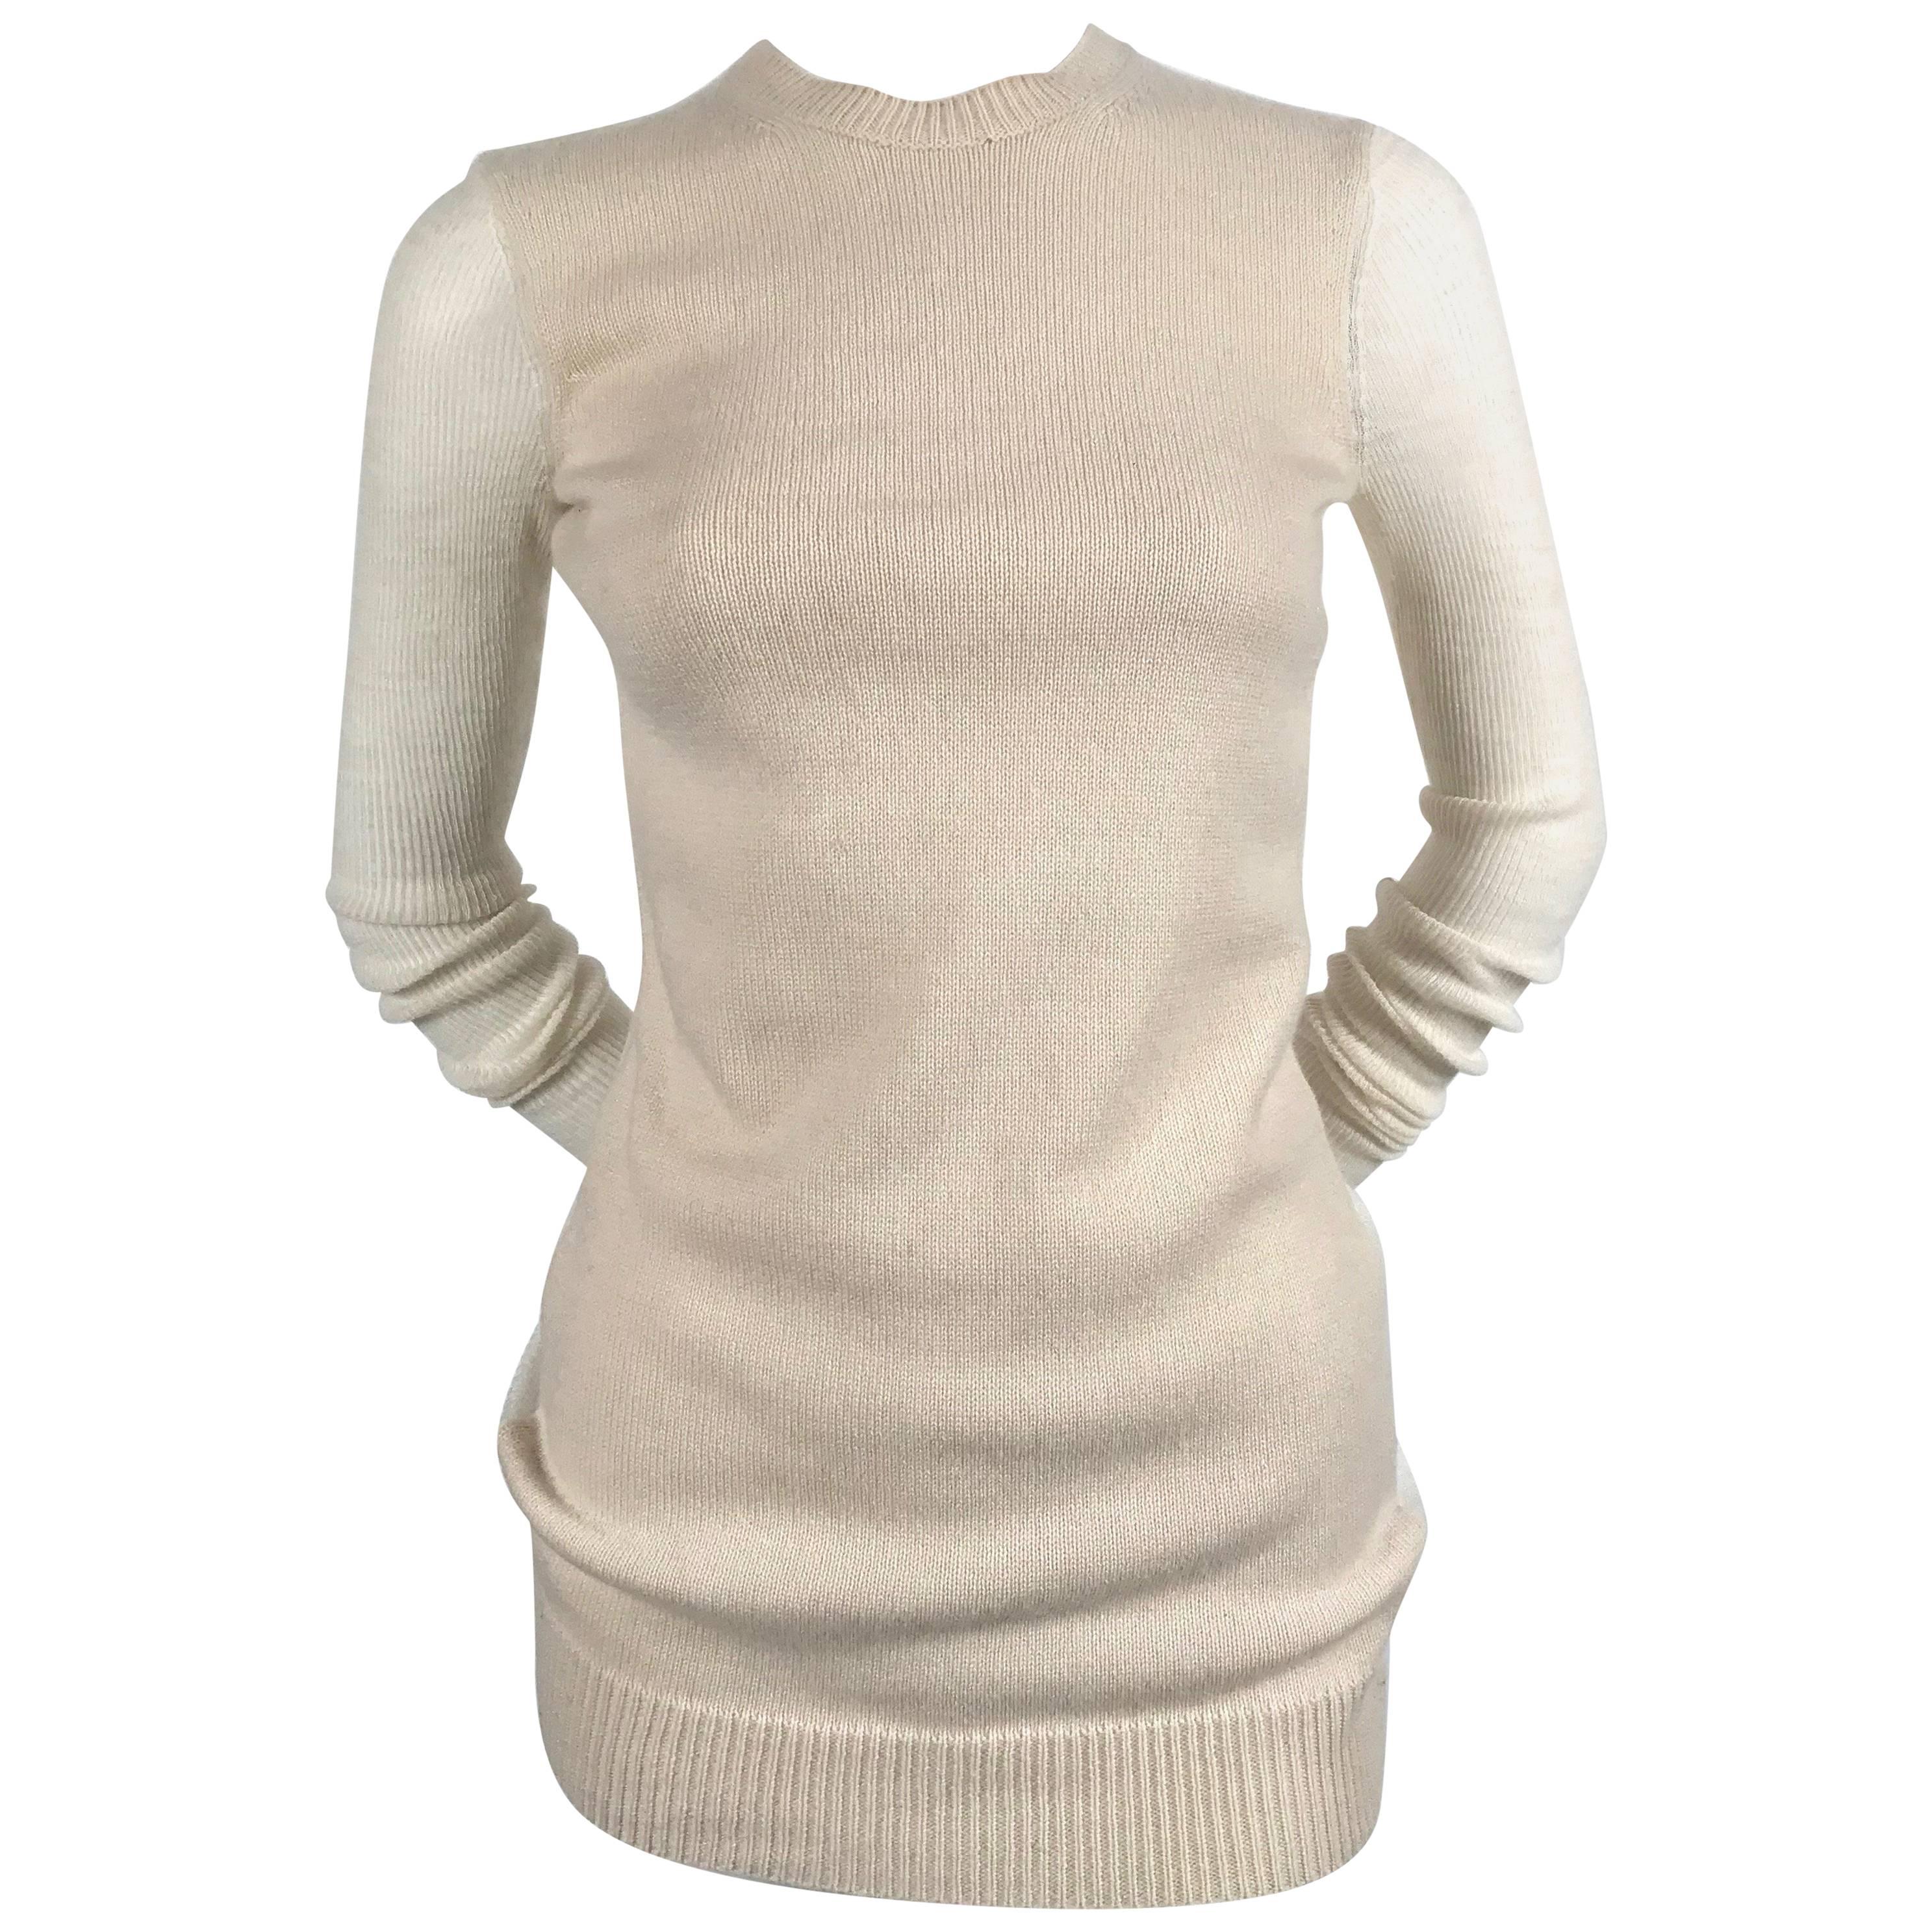 CELINE by PHOEBE PHILO cashmere and alpaca sheer sweater